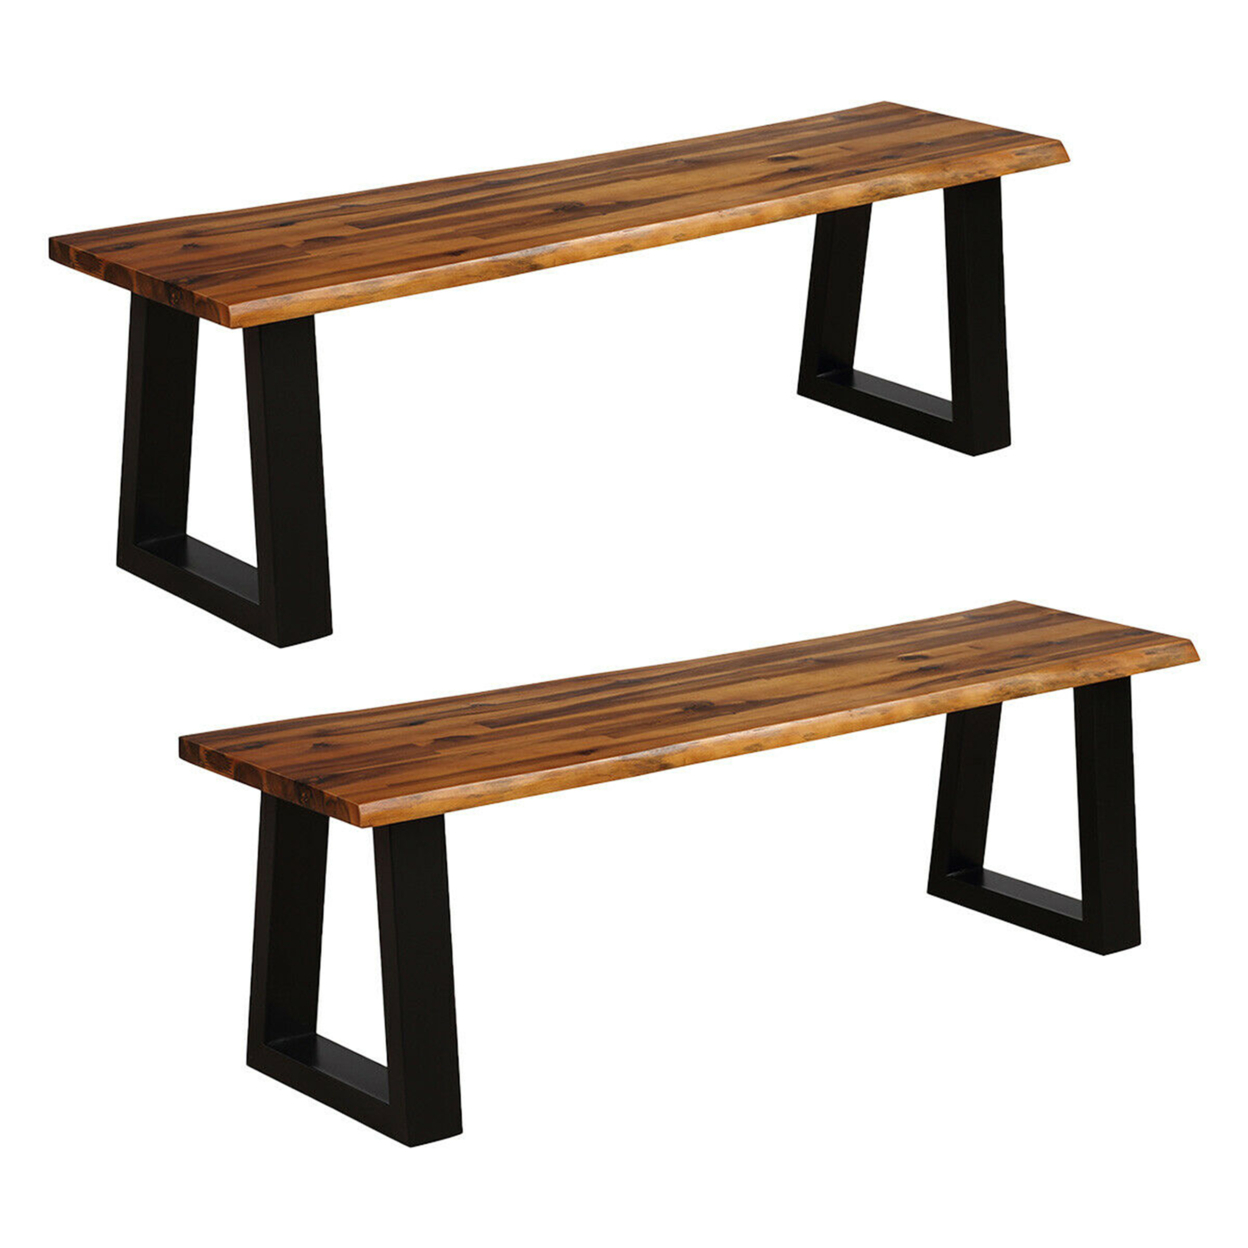 2 PCS Solid Acacia Wood Patio Bench Dining Bench Outdoor W/Rustic Metal Legs